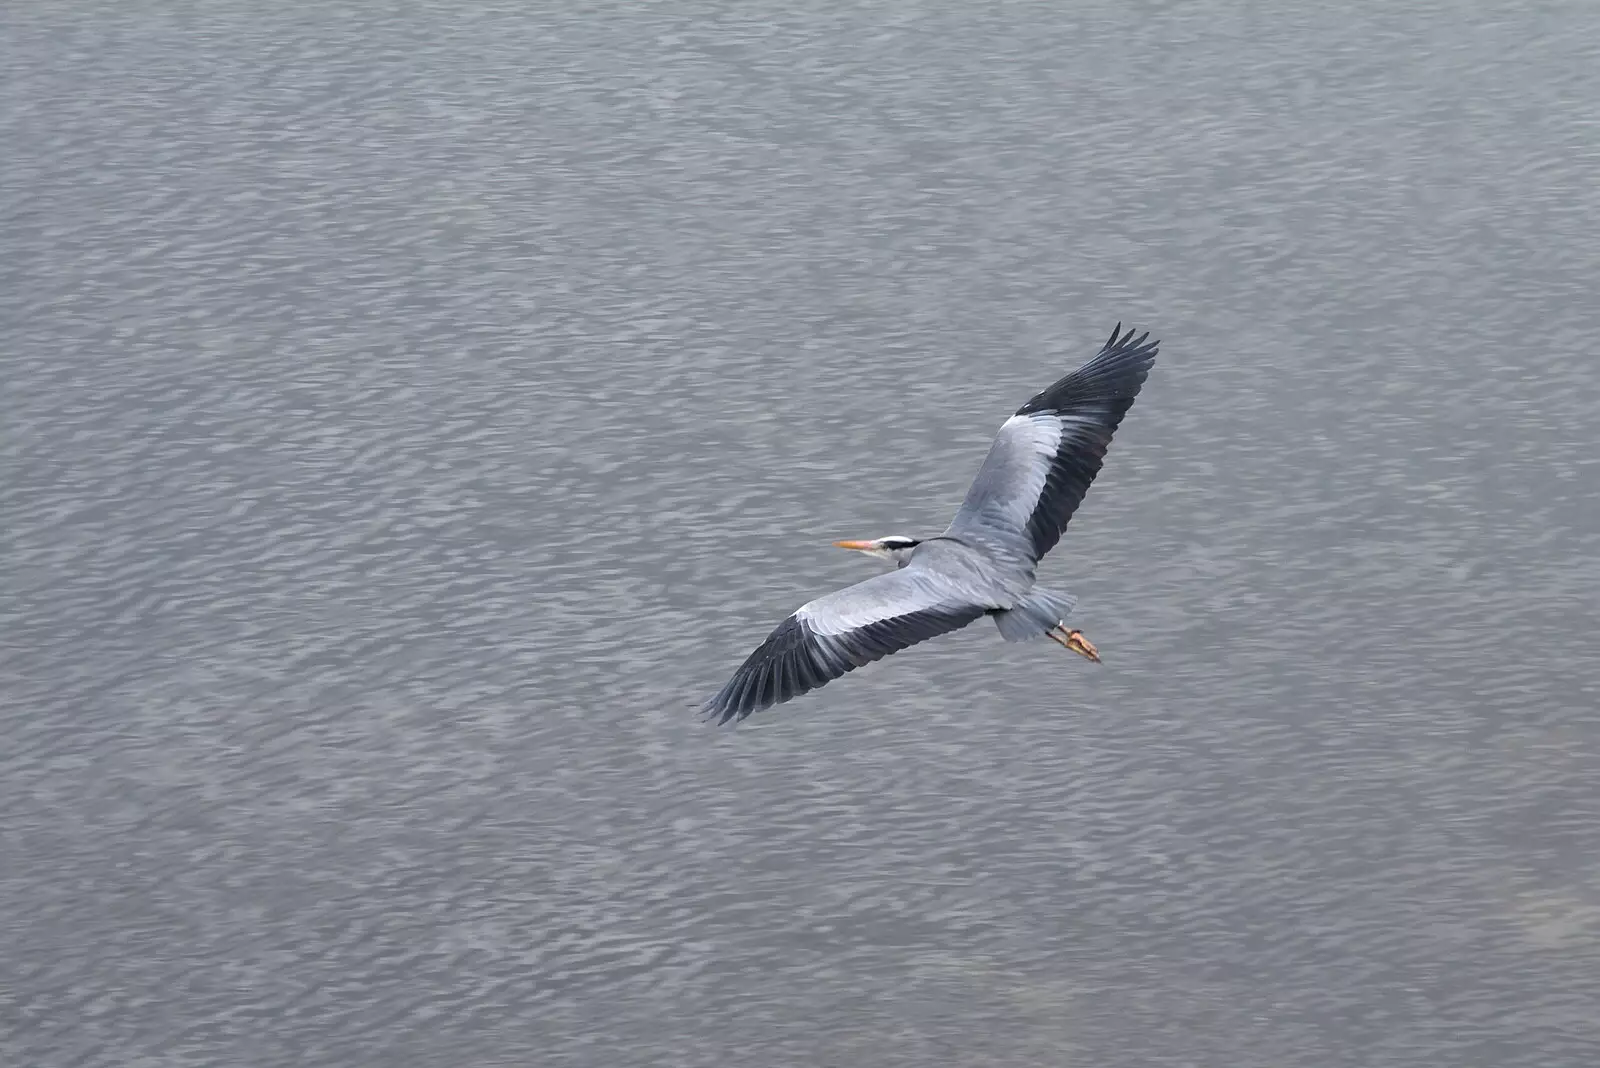 The heron takes flight over the sea, from The End of the Breffni, Blackrock, Dublin - 18th February 2023